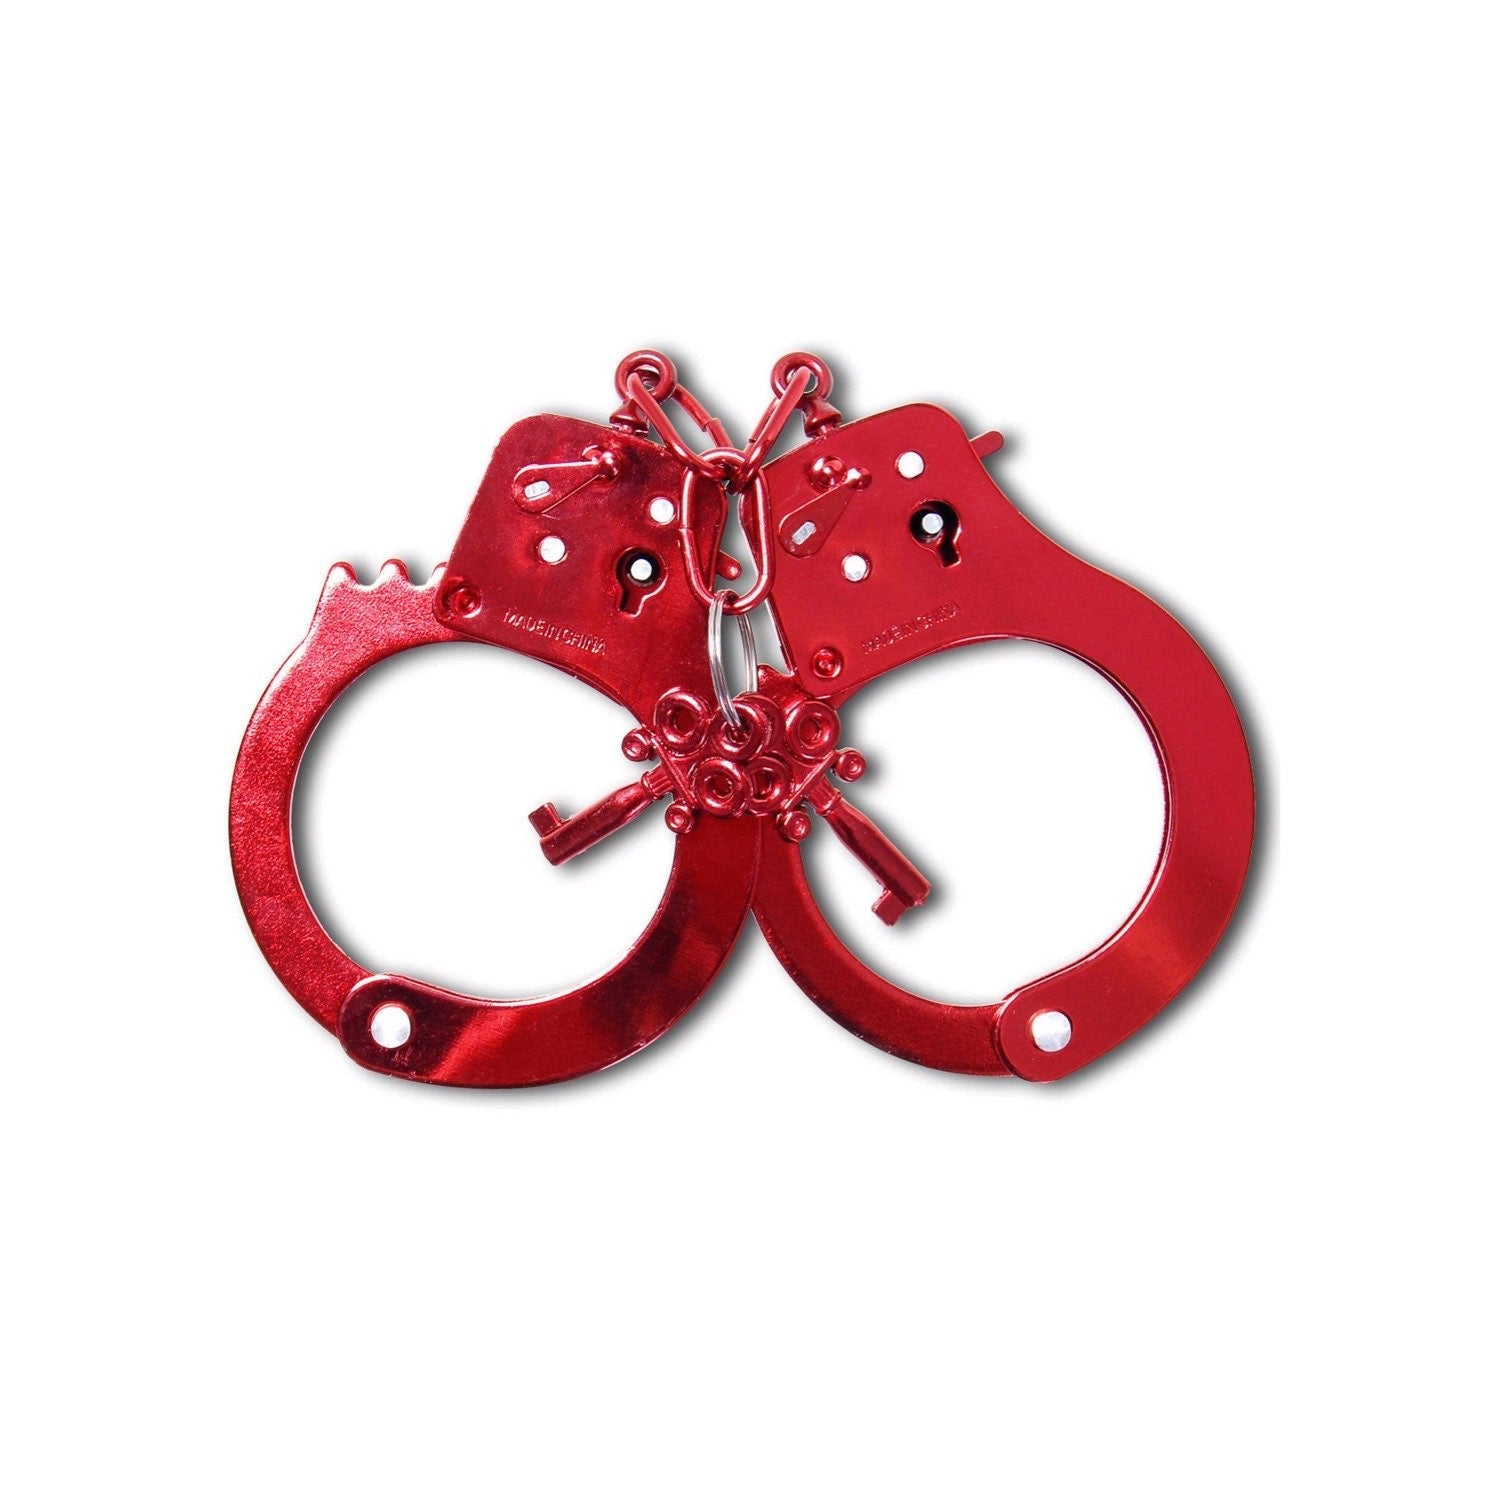 Fetish Fantasy Series Anodized Cuffs - Red Metal Restraints by Pipedream